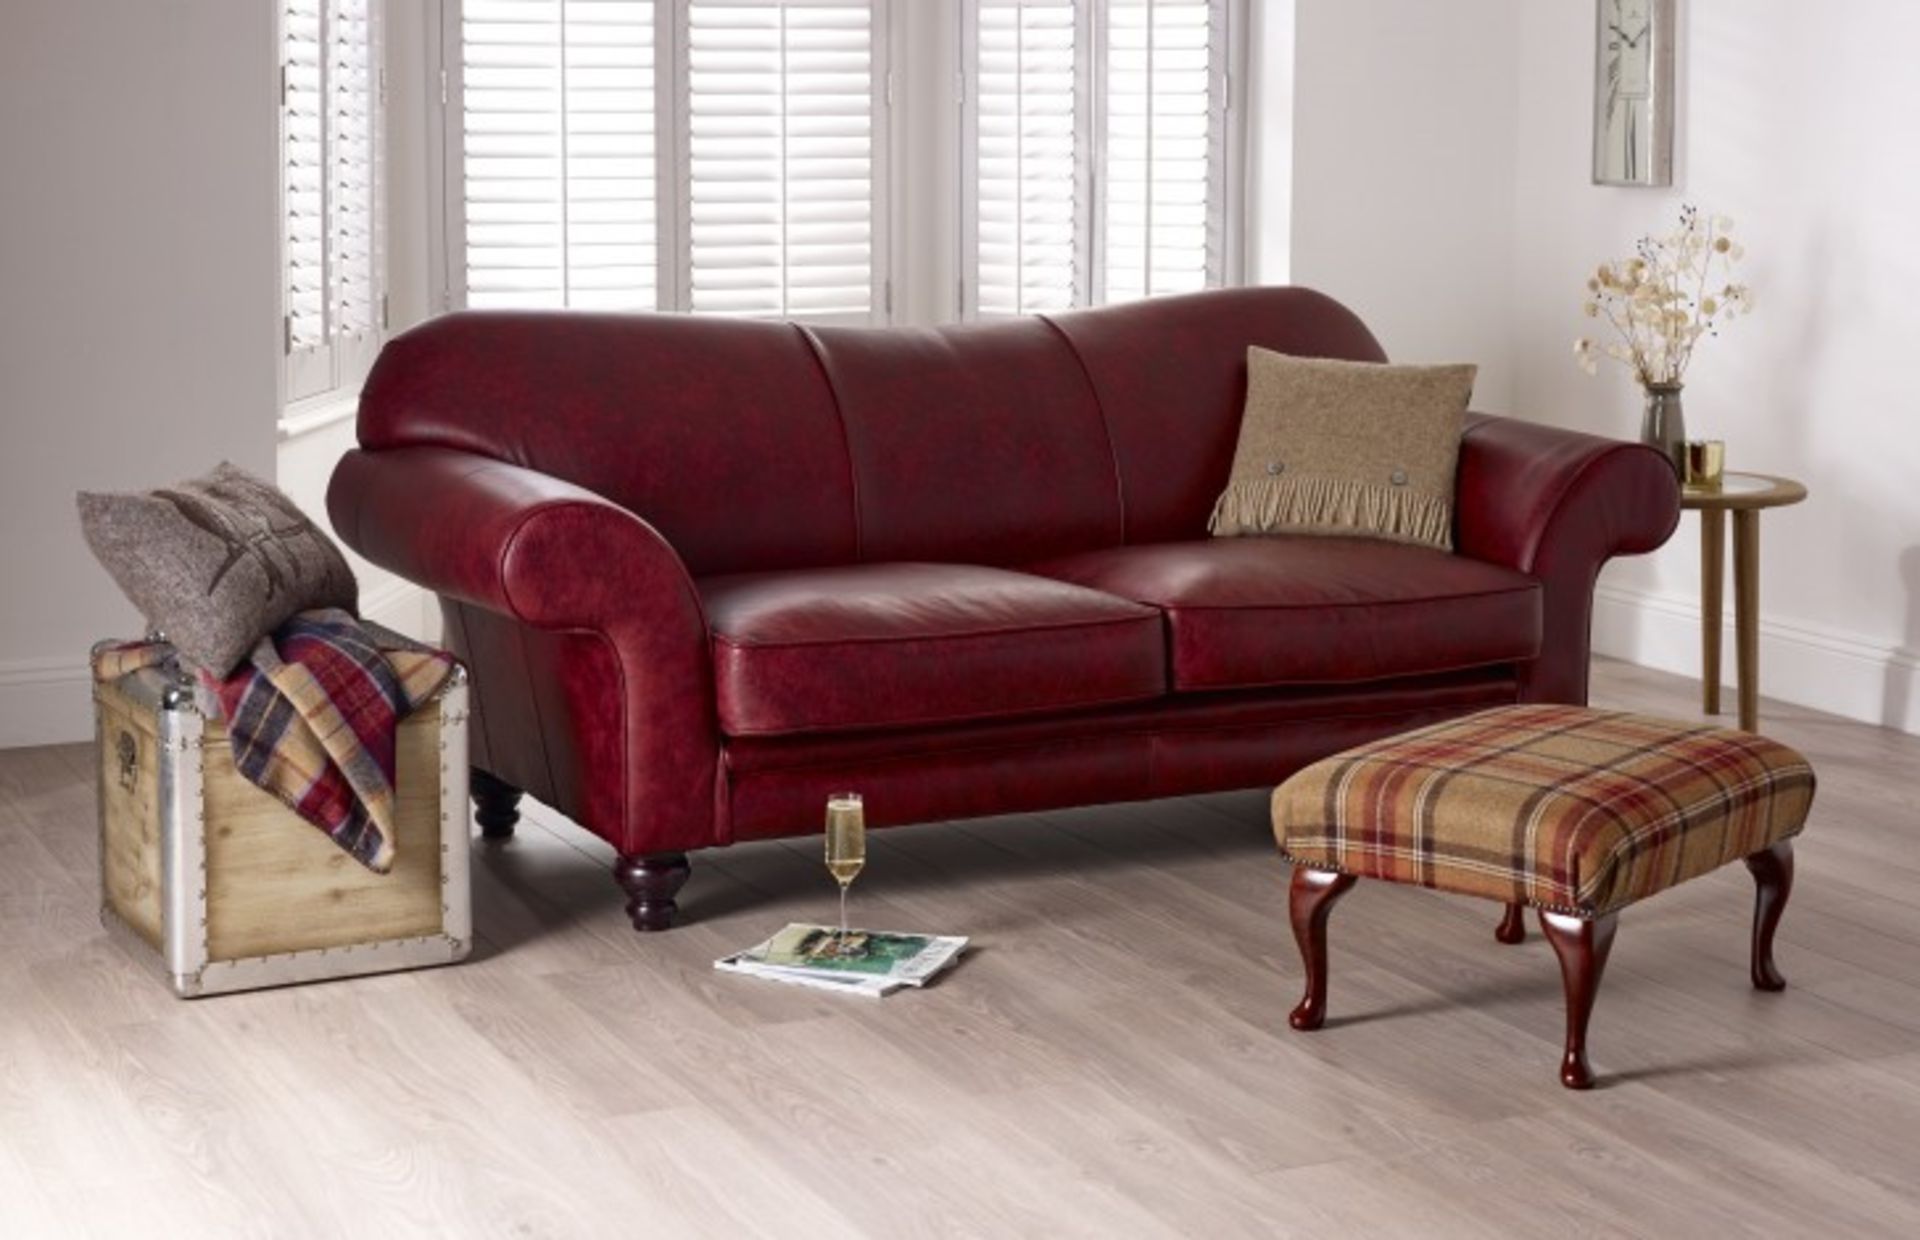 Eton 3 Seater Tobacco Leather Curved Sofa A Beautiful Narrower Depth Sofa A Contemporary Twist On